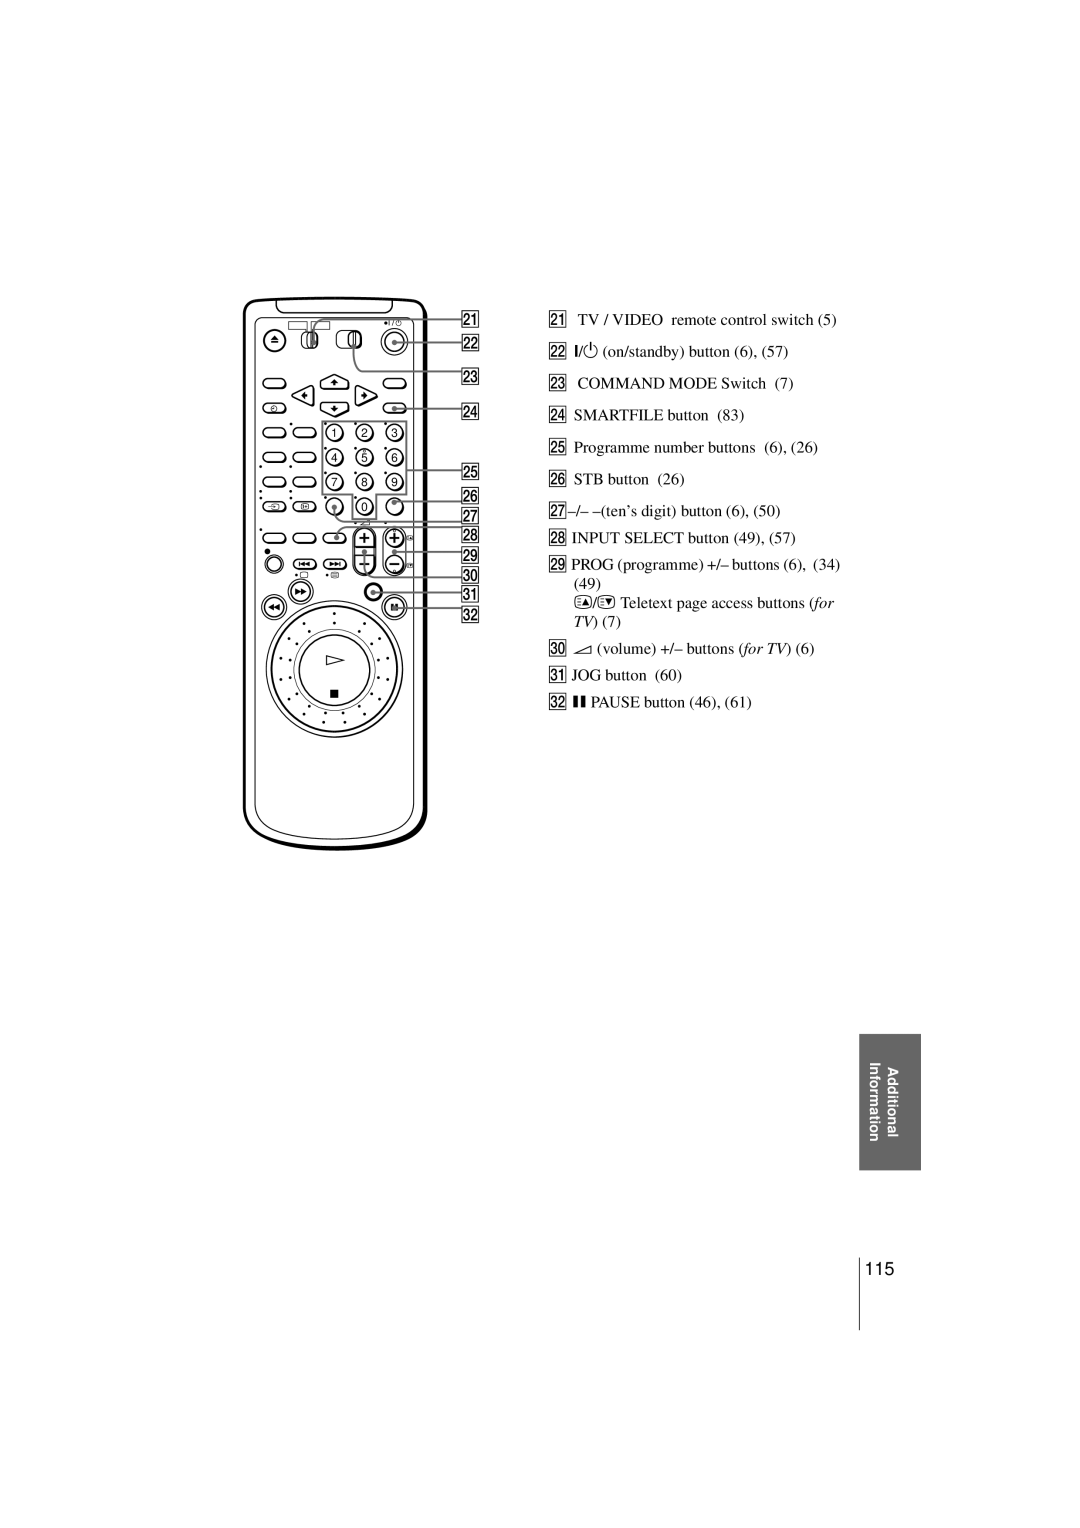 Sony SLV-SF990G manual U TV / VIDEO remote control switch V ?/1 on/standby button 6, Z STB button, Information, Additional 